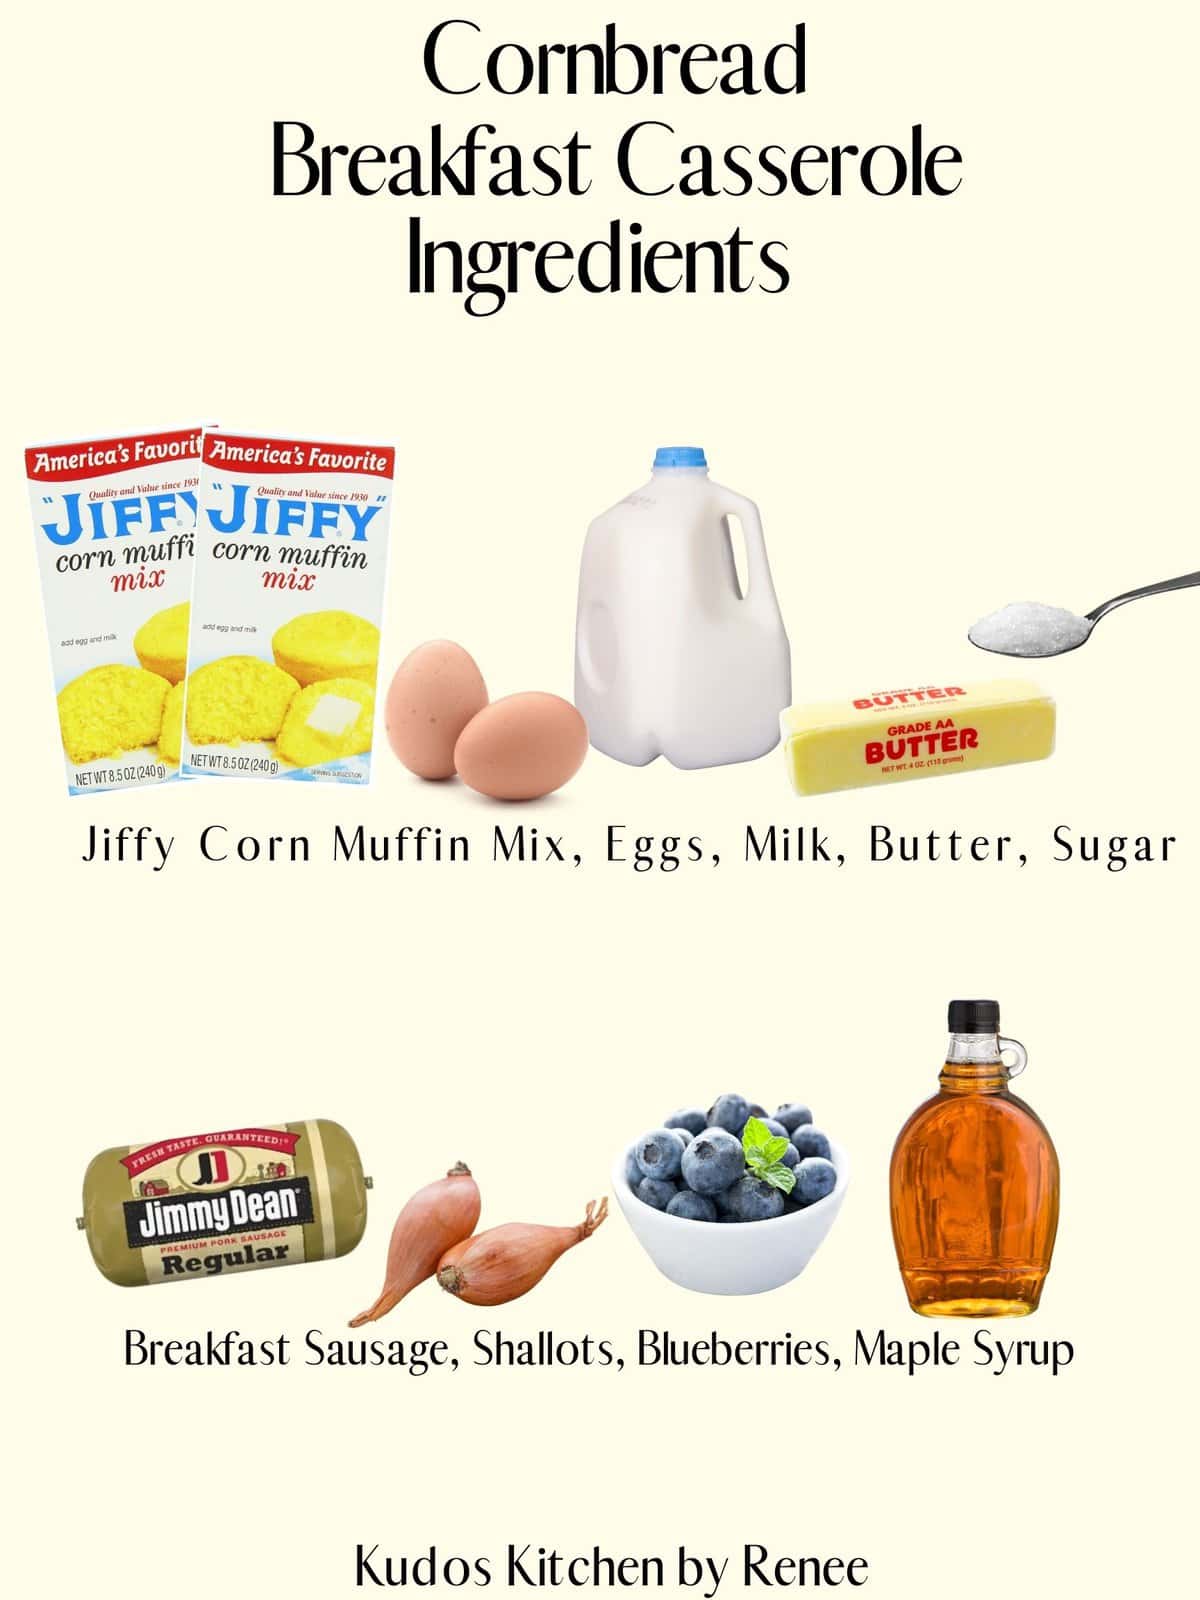 A visual ingredient list for making Cornbread Breakfast Casserole with Sausage and Blueberries.